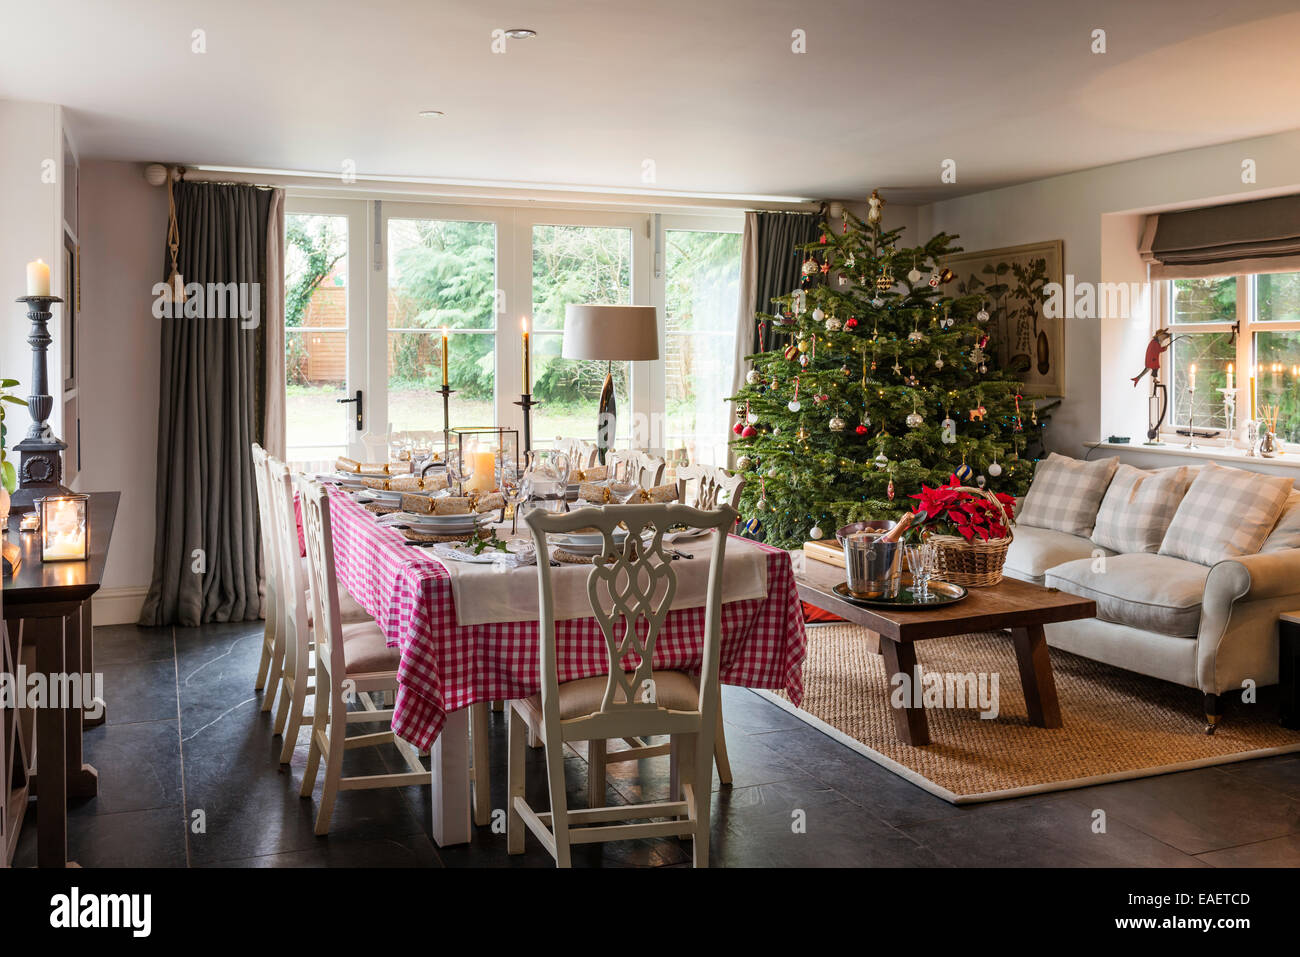 Table laid for christmas lunch in living area with decorated tree, antique sofa and seagrass mat Stock Photo